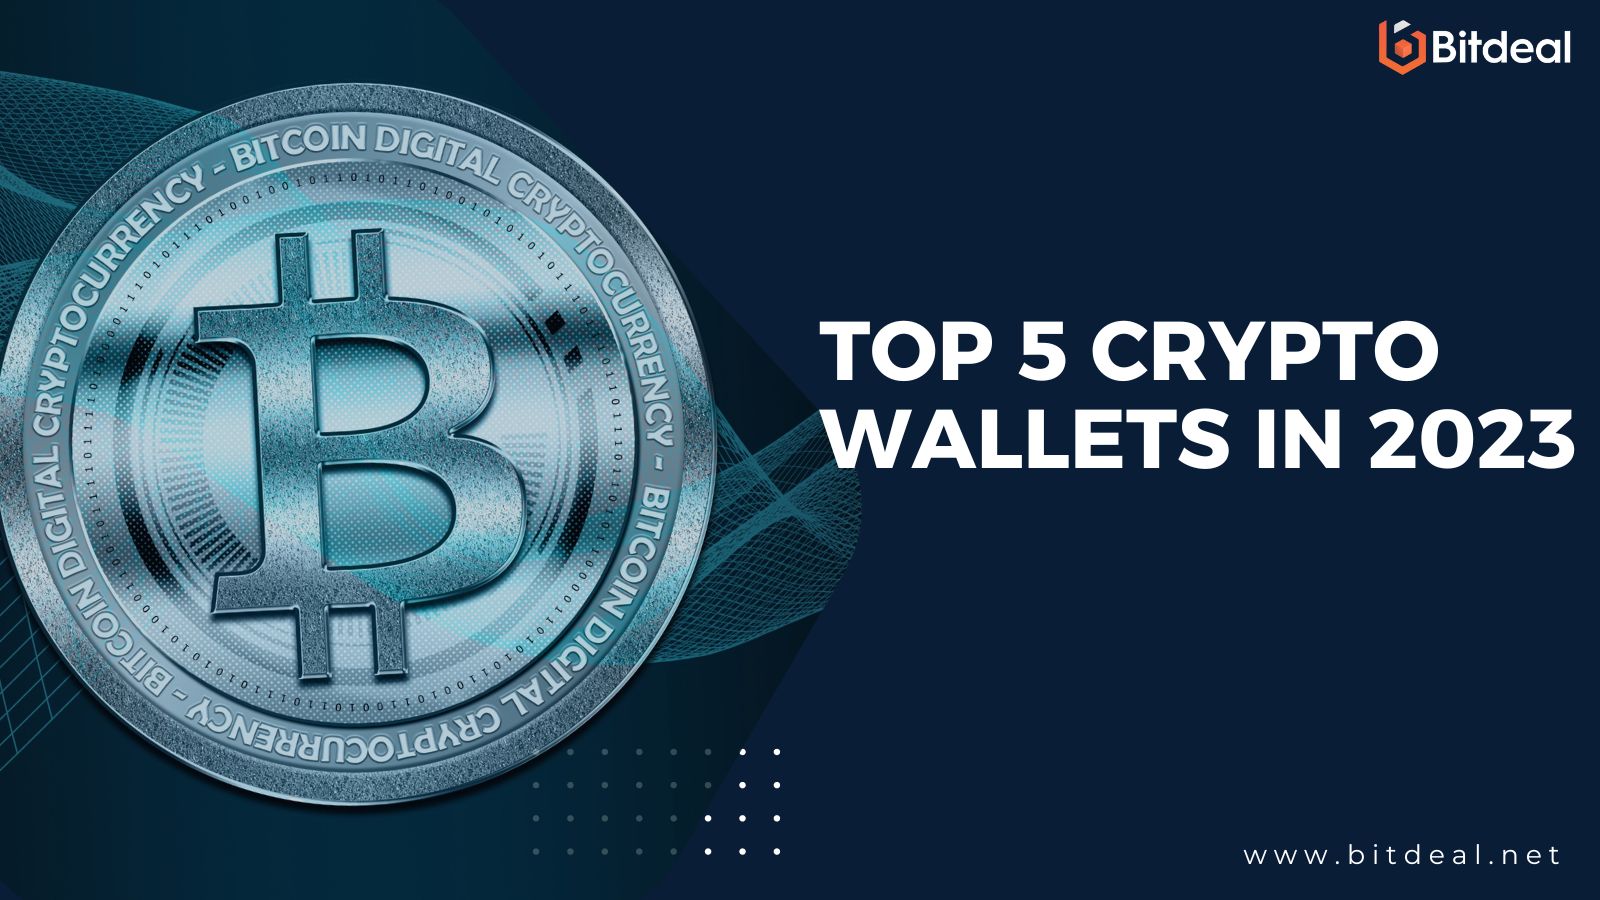 Top 5 crypto wallets in 2023